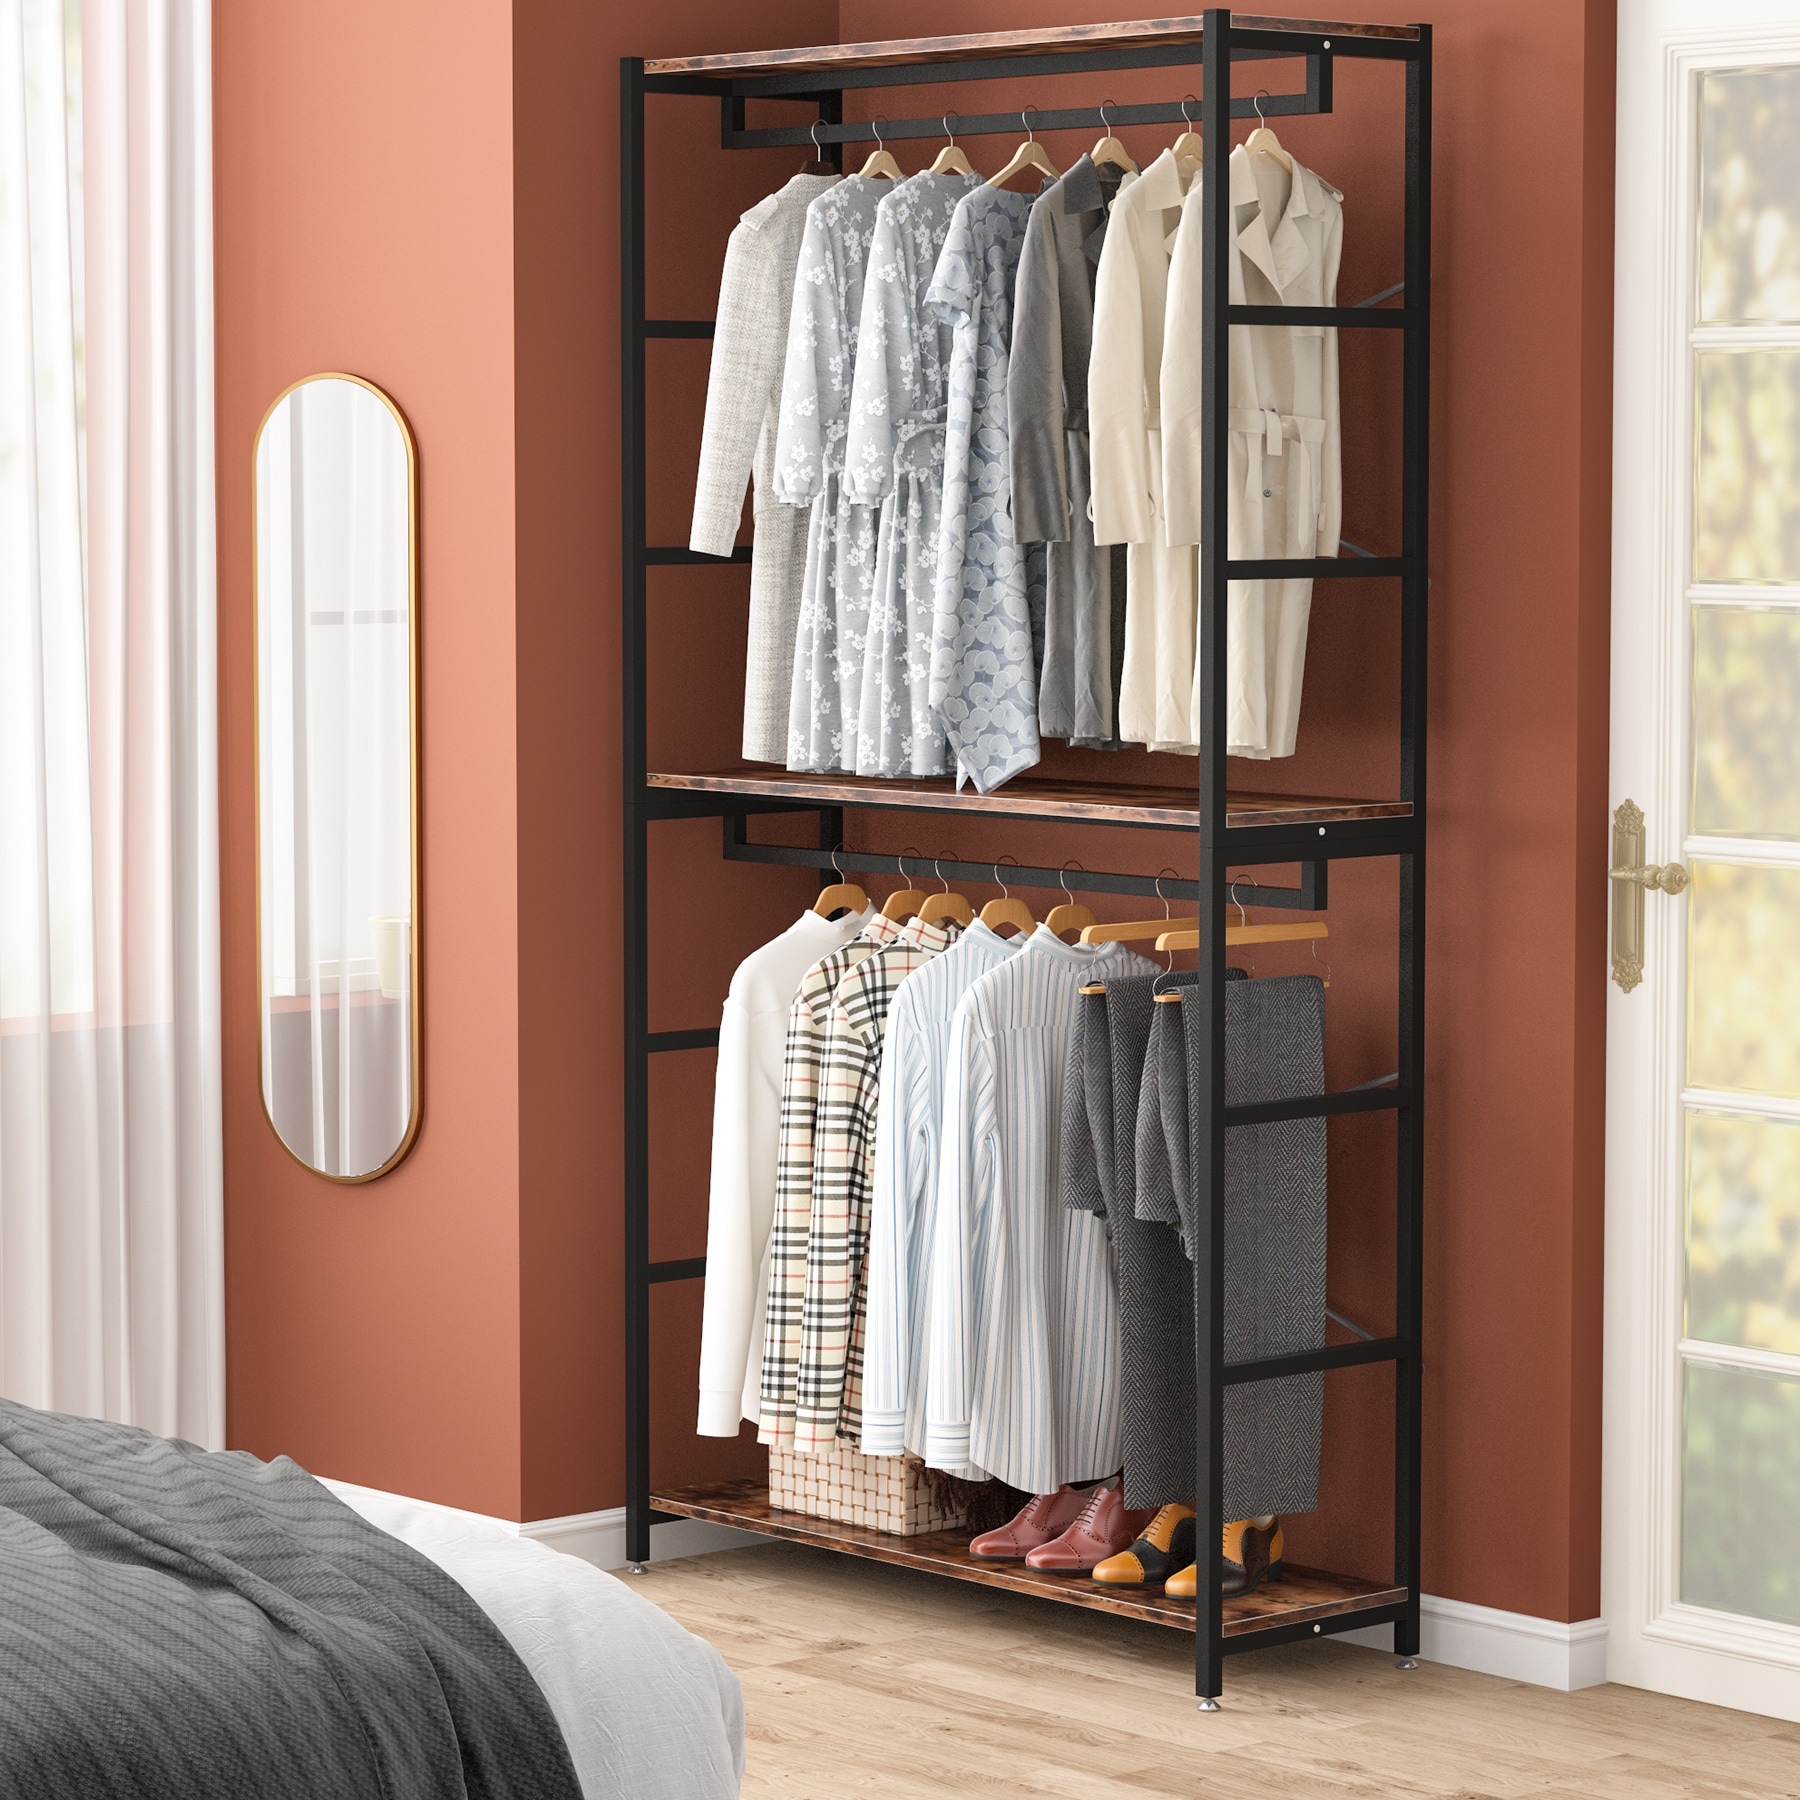 Extra Tall 47 Inches Double Rod Closet Shelf Freestanding 3 Shelves Clothes Clothing Garment Racks - Brown&Black